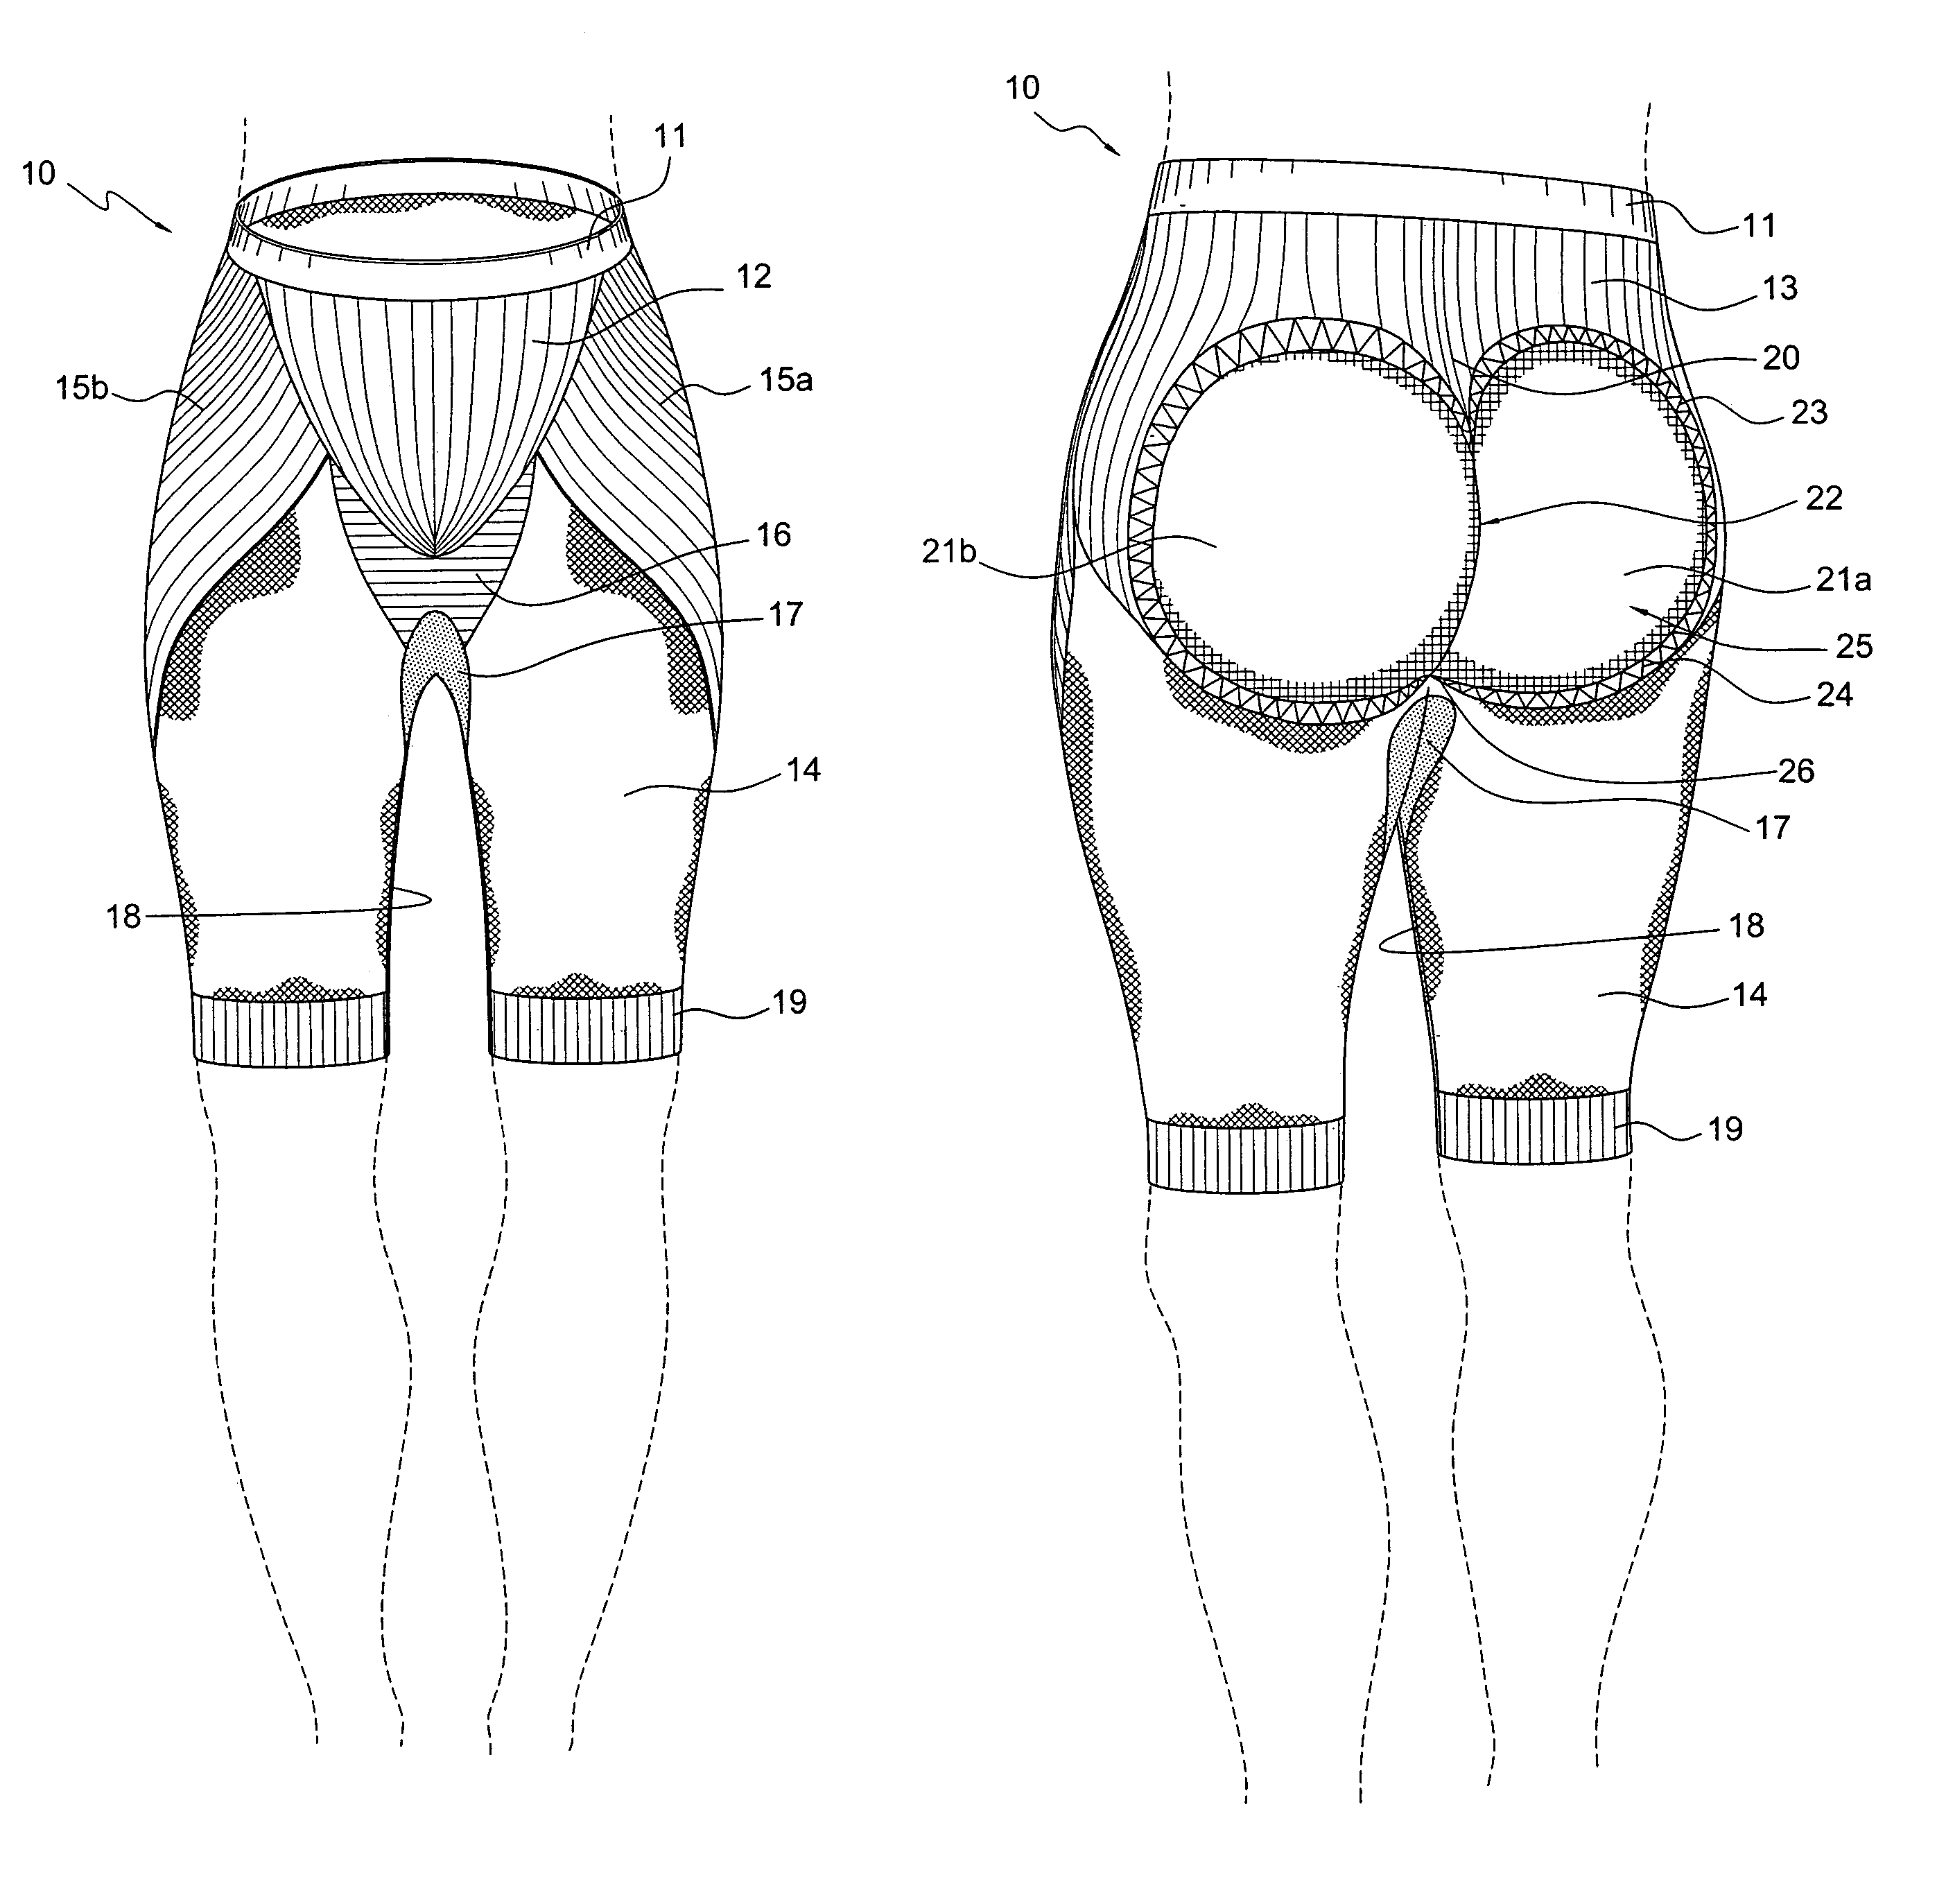 Circularly knit undergarment having knit-in support panels and derriere cup fullness